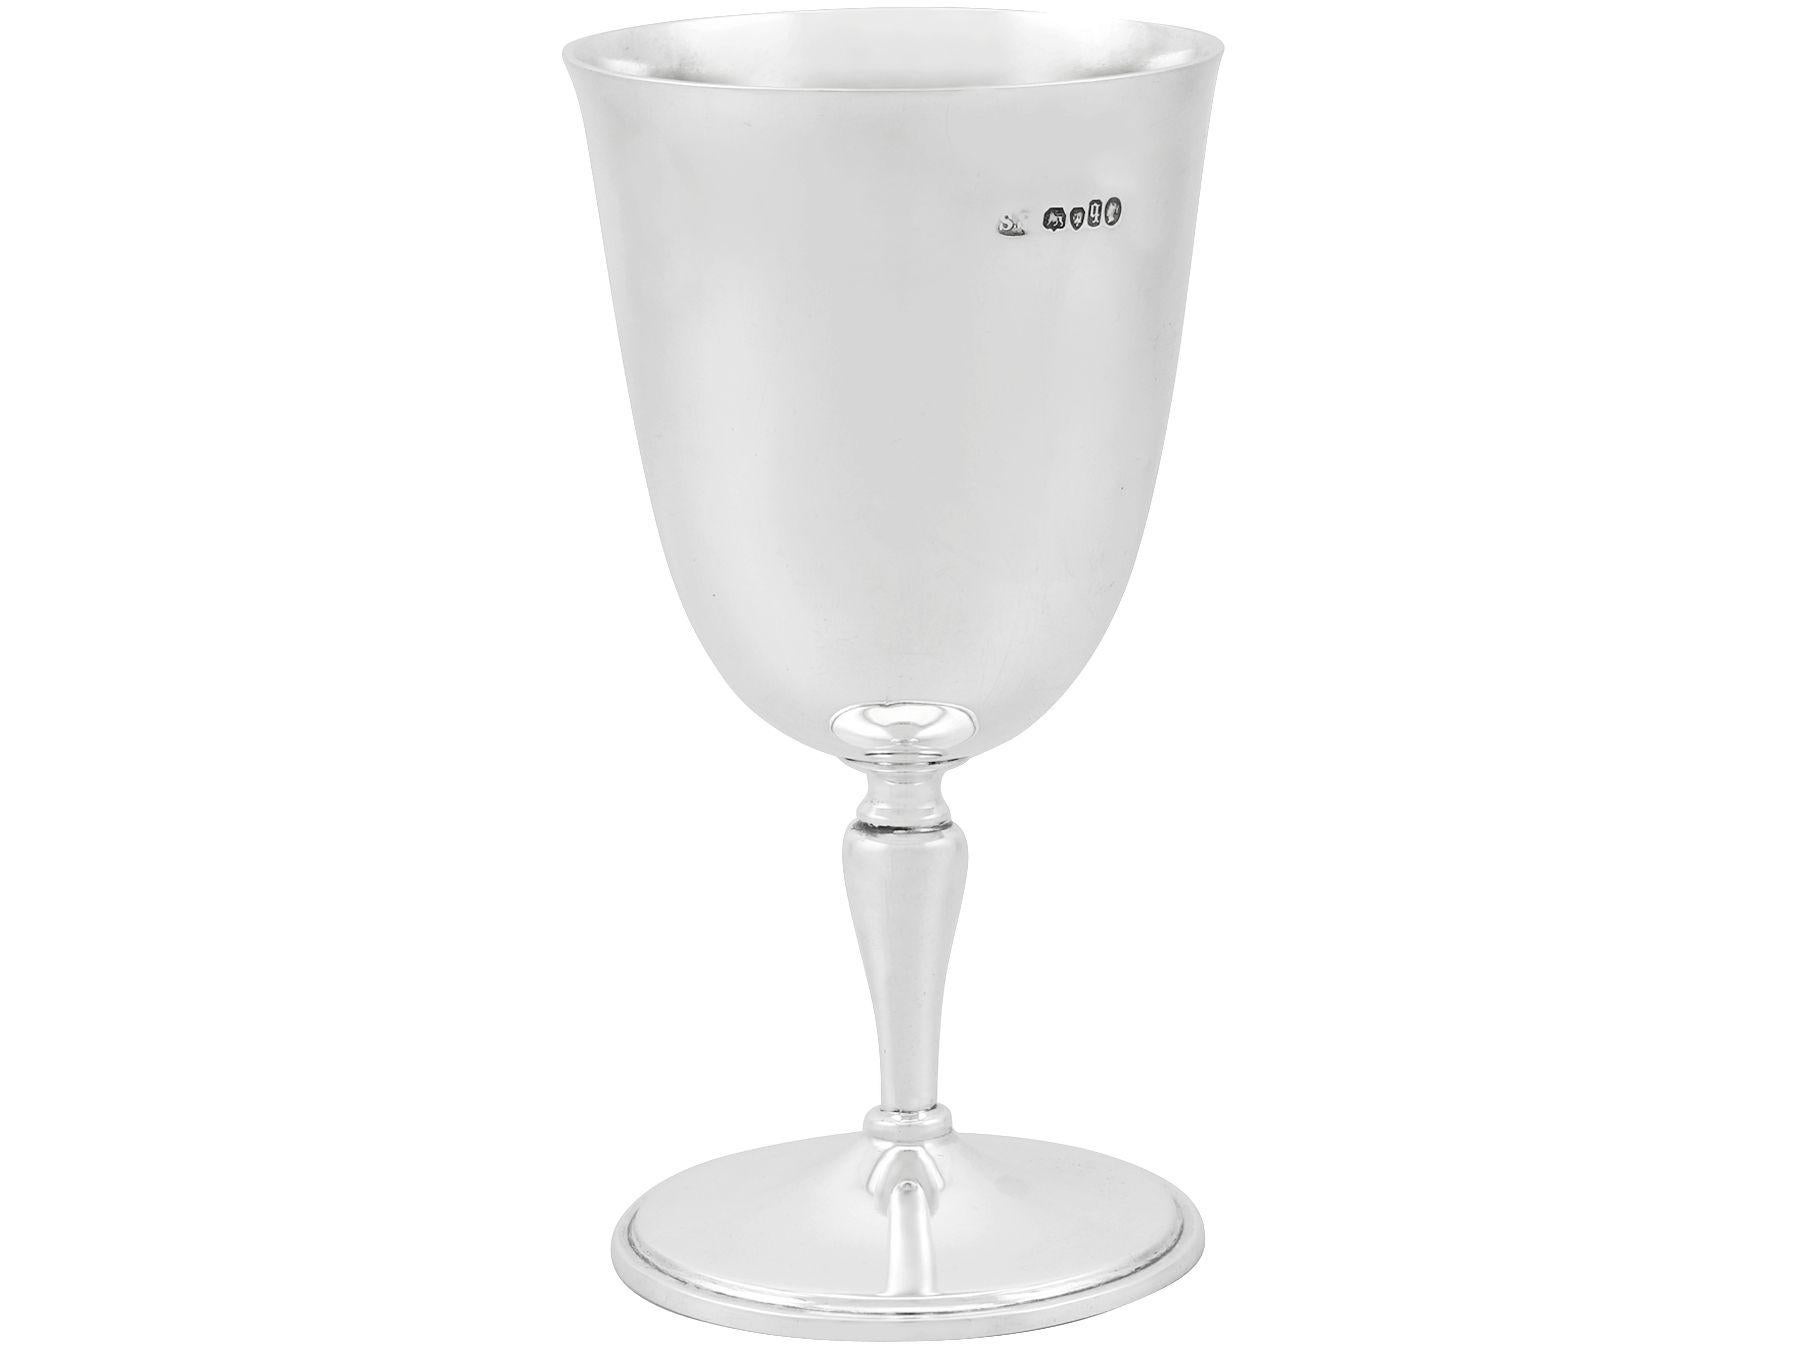 An exceptional, fine and impressive antique Victorian English sterling silver goblet, an addition to our wine and drinks related silverware collection.

This exceptional antique Victorian sterling silver goblet has a plain bell shaped form onto a